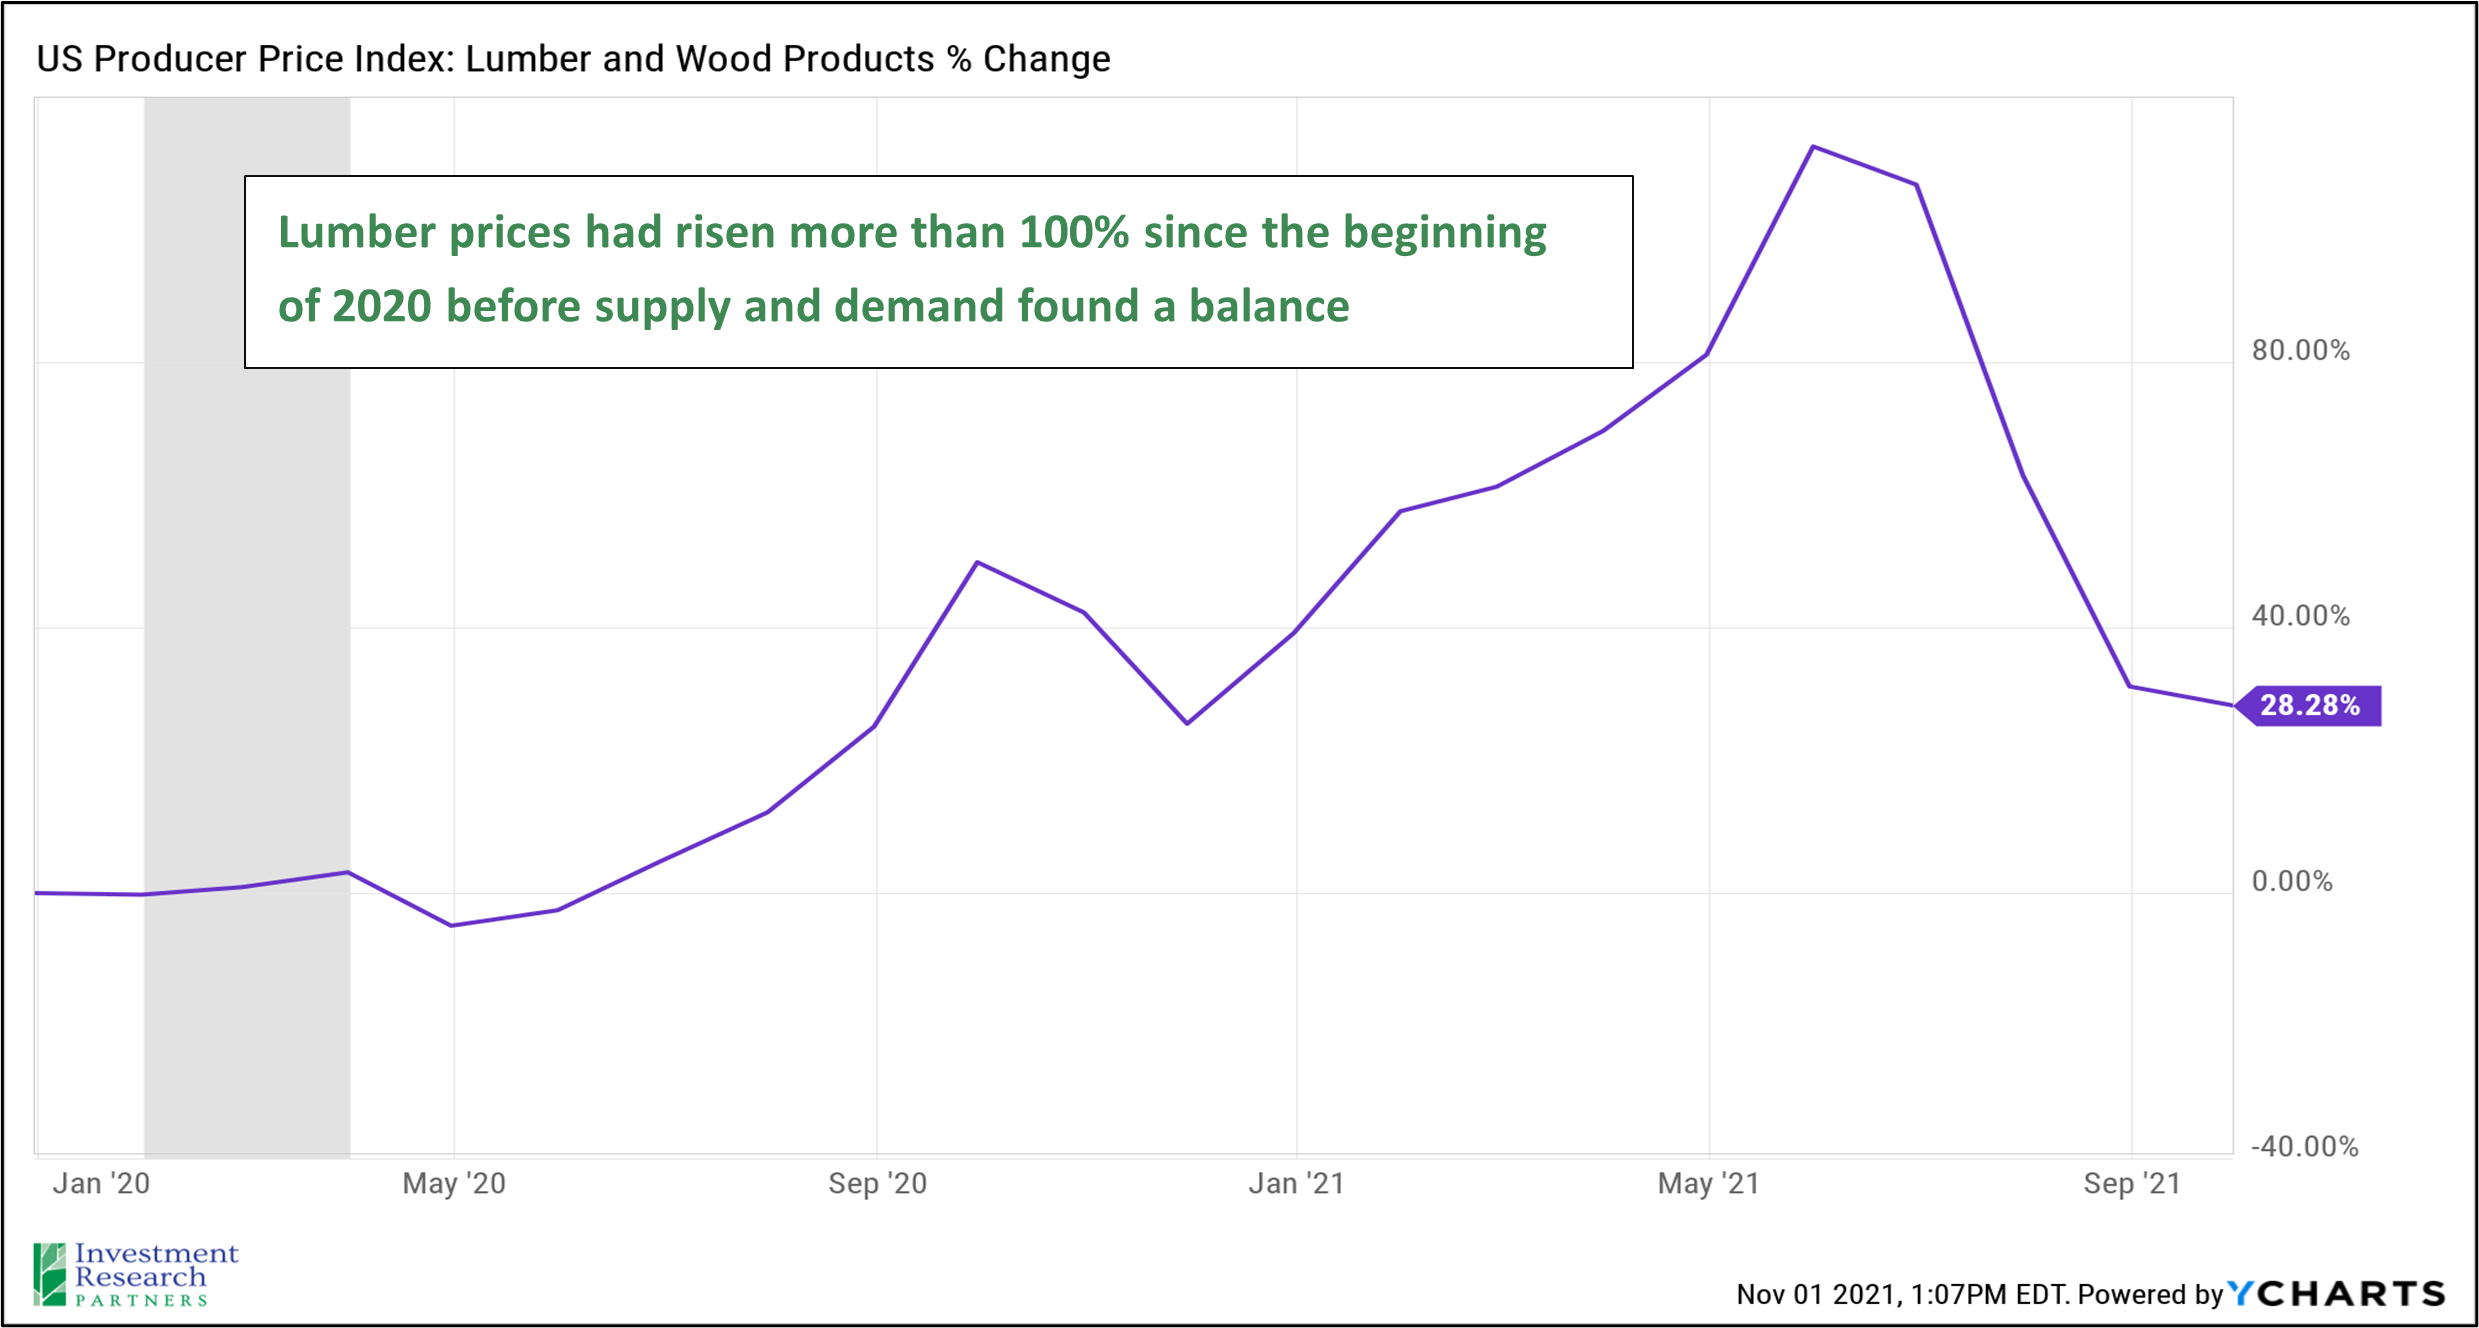 Line graph depicting US Producer Price Index: Lumber and Wood Products % Change from January 2020 to September 2021 with text that reads: Lumber prices had risen more than 100% since the beginning of 2020 before supply and demand found a balance